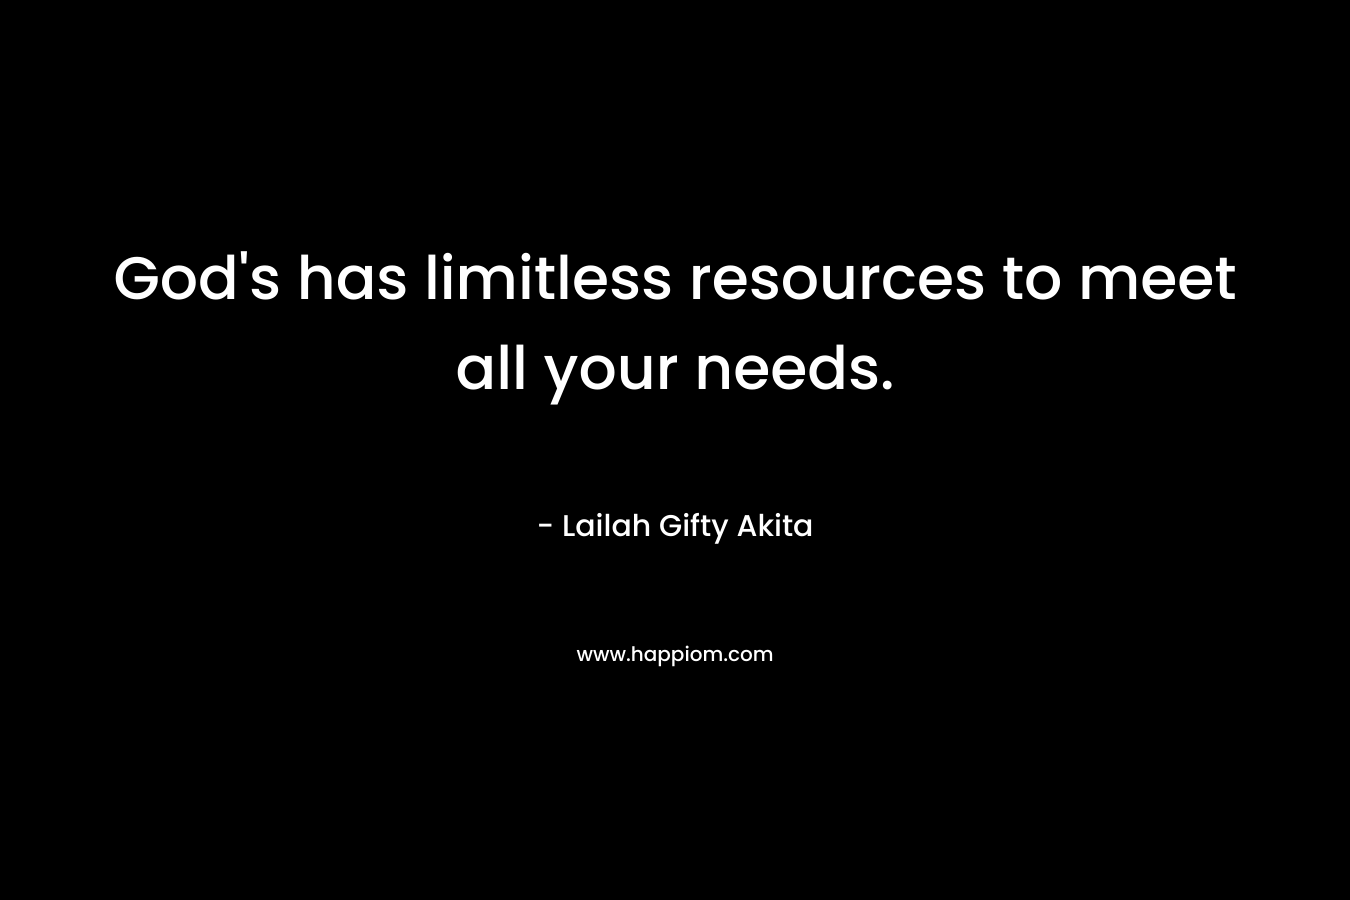 God's has limitless resources to meet all your needs.